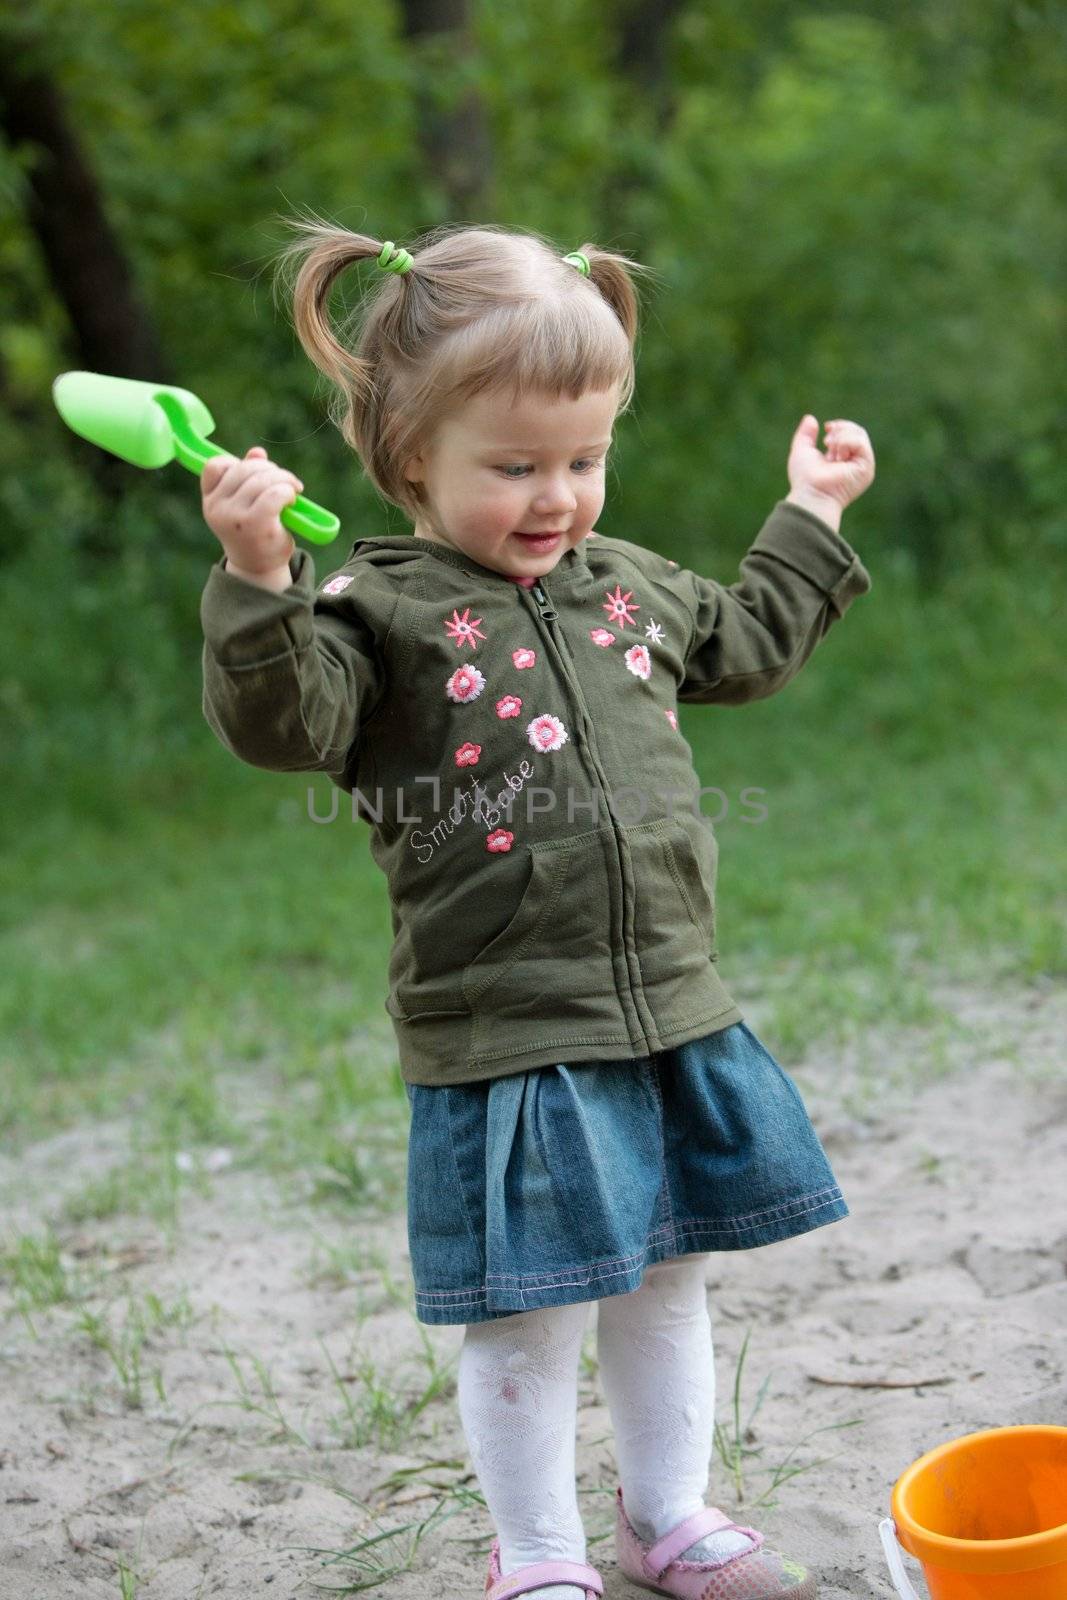 shild series: little girl play and smile